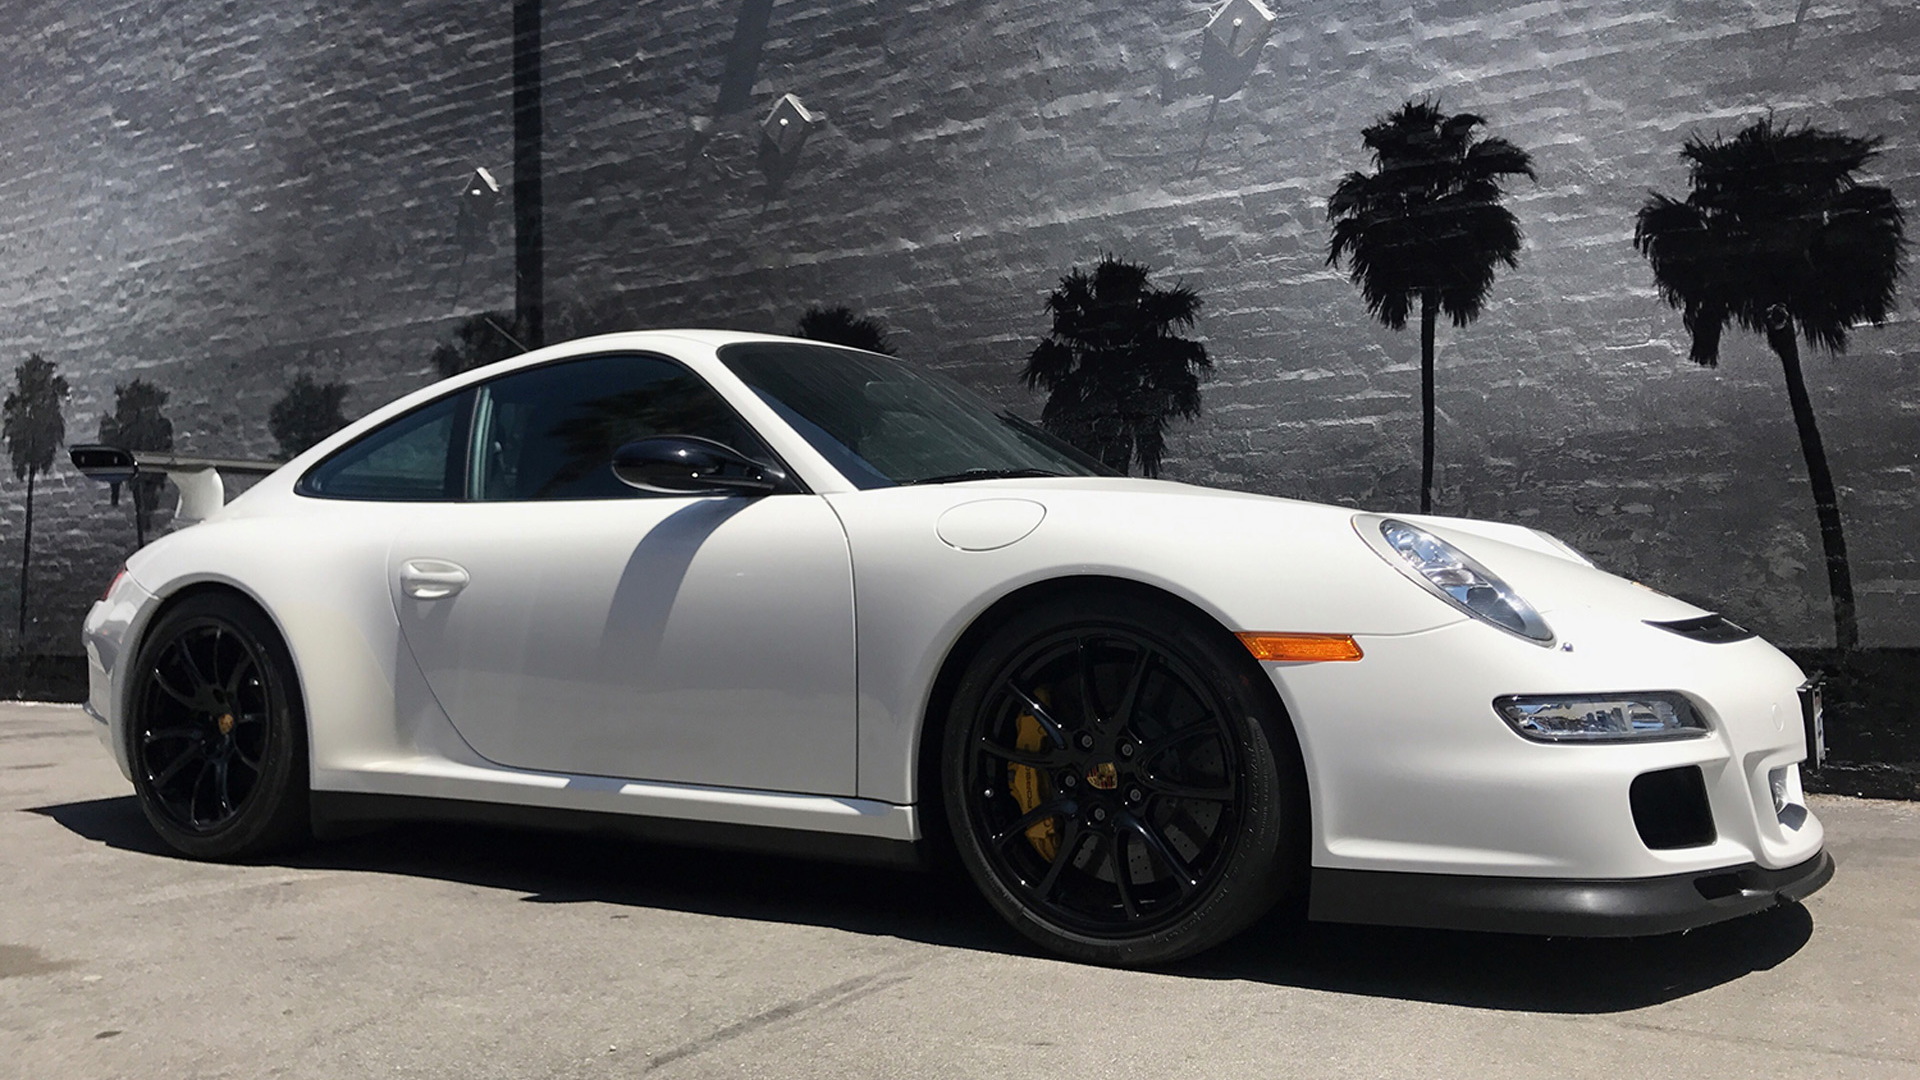 2007 Porsche 911 GT3 RS once owned by Jerry Seinfeld - Image via Russo and Steele